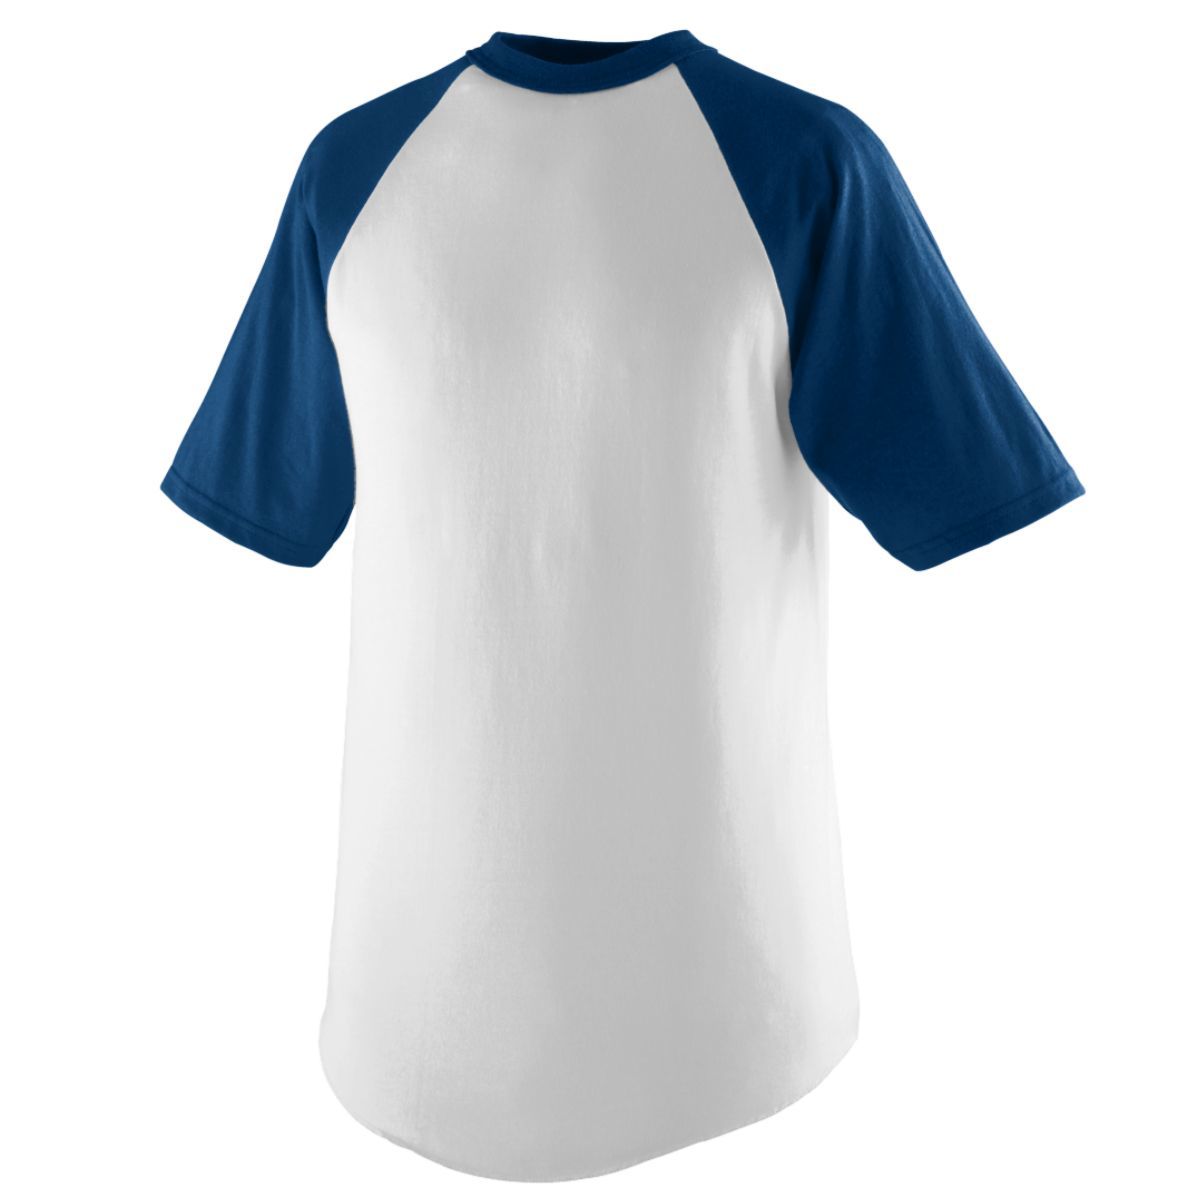 Augusta Sportswear Youth Short Sleeve Baseball Jersey in White/Navy  -Part of the Youth, Youth-Jersey, Augusta-Products, Baseball, Shirts, All-Sports, All-Sports-1 product lines at KanaleyCreations.com